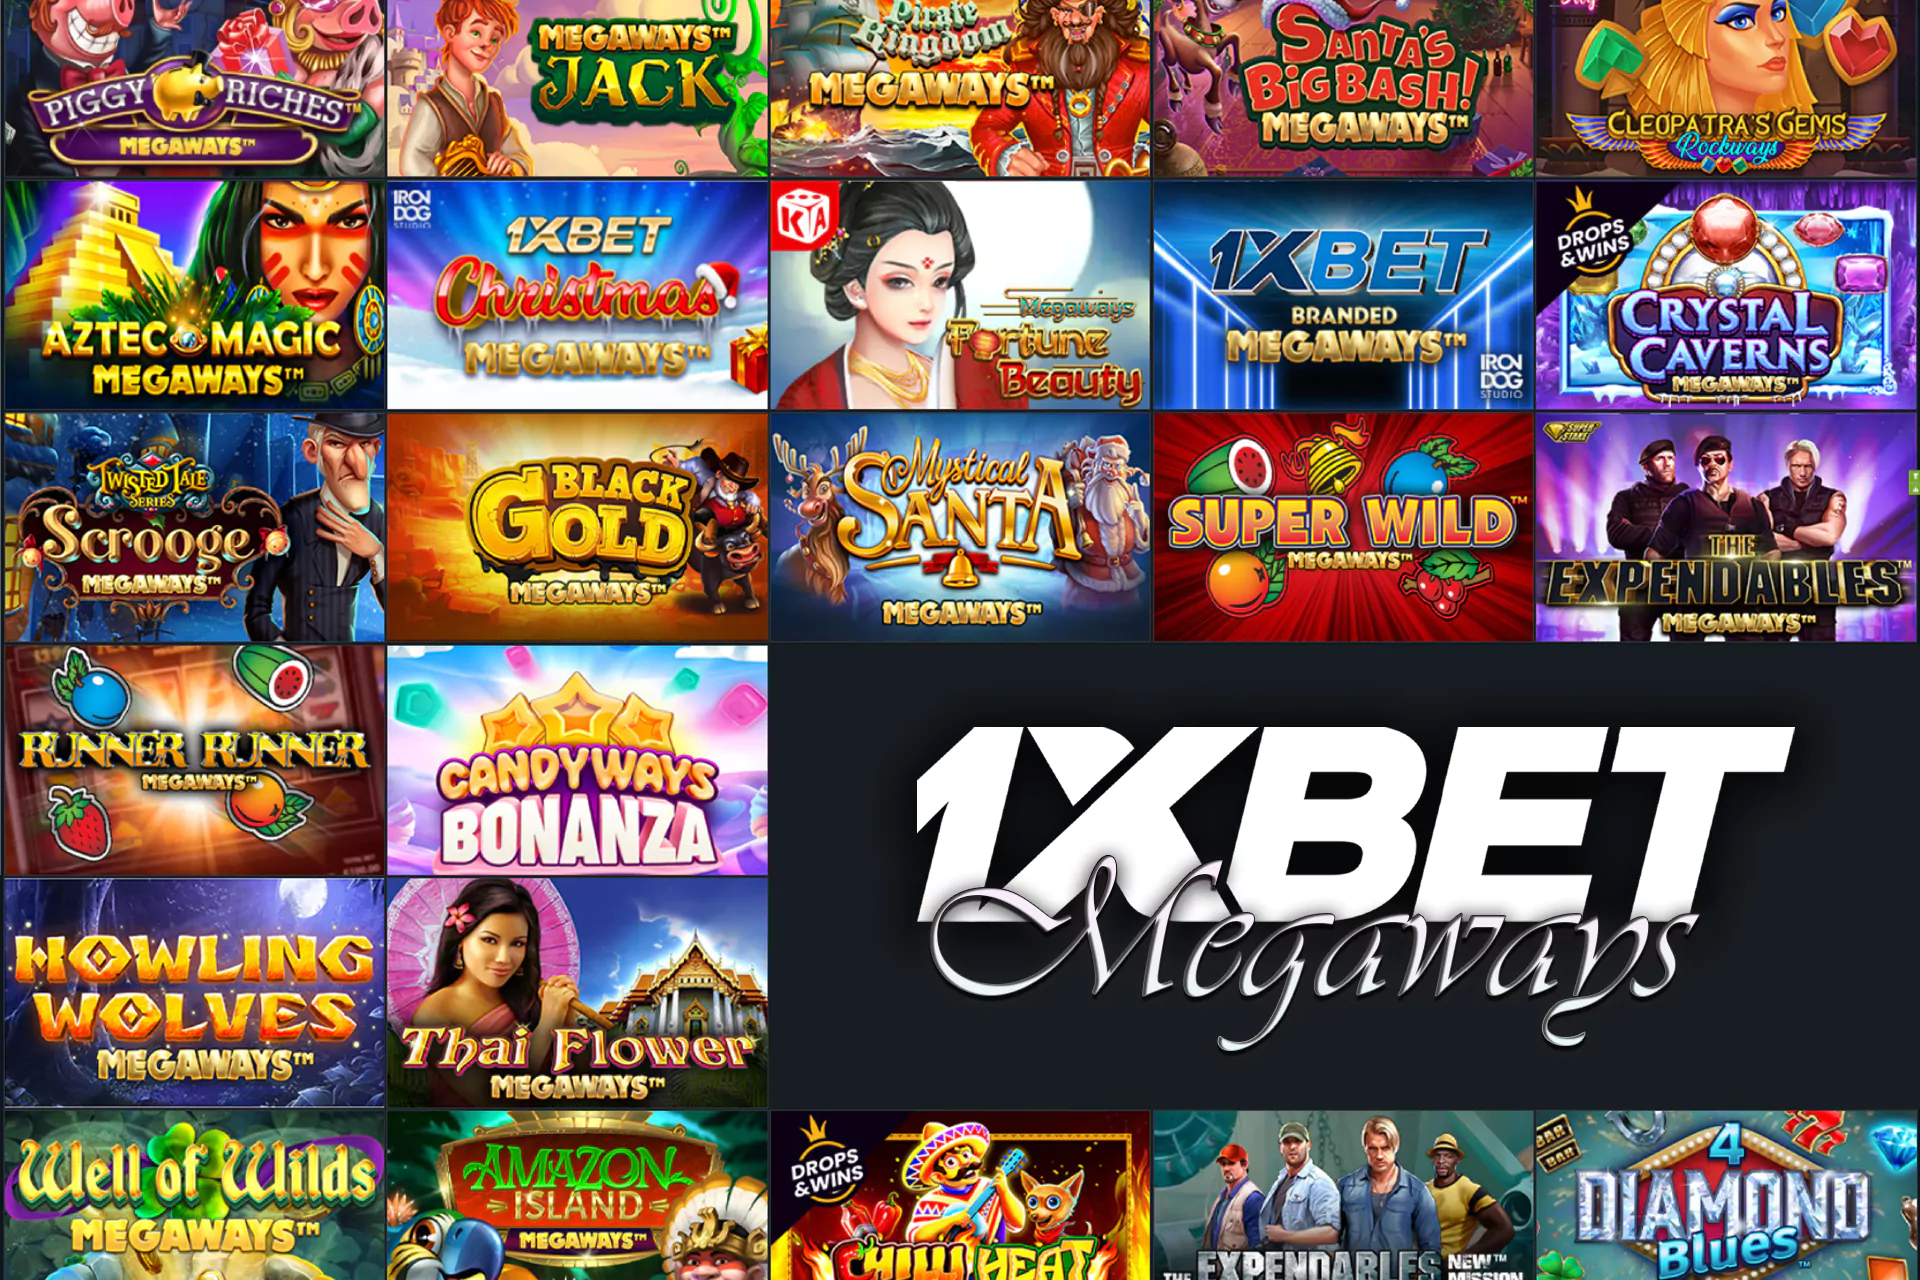 Megaways is one more collection of slots games at 1xBet.